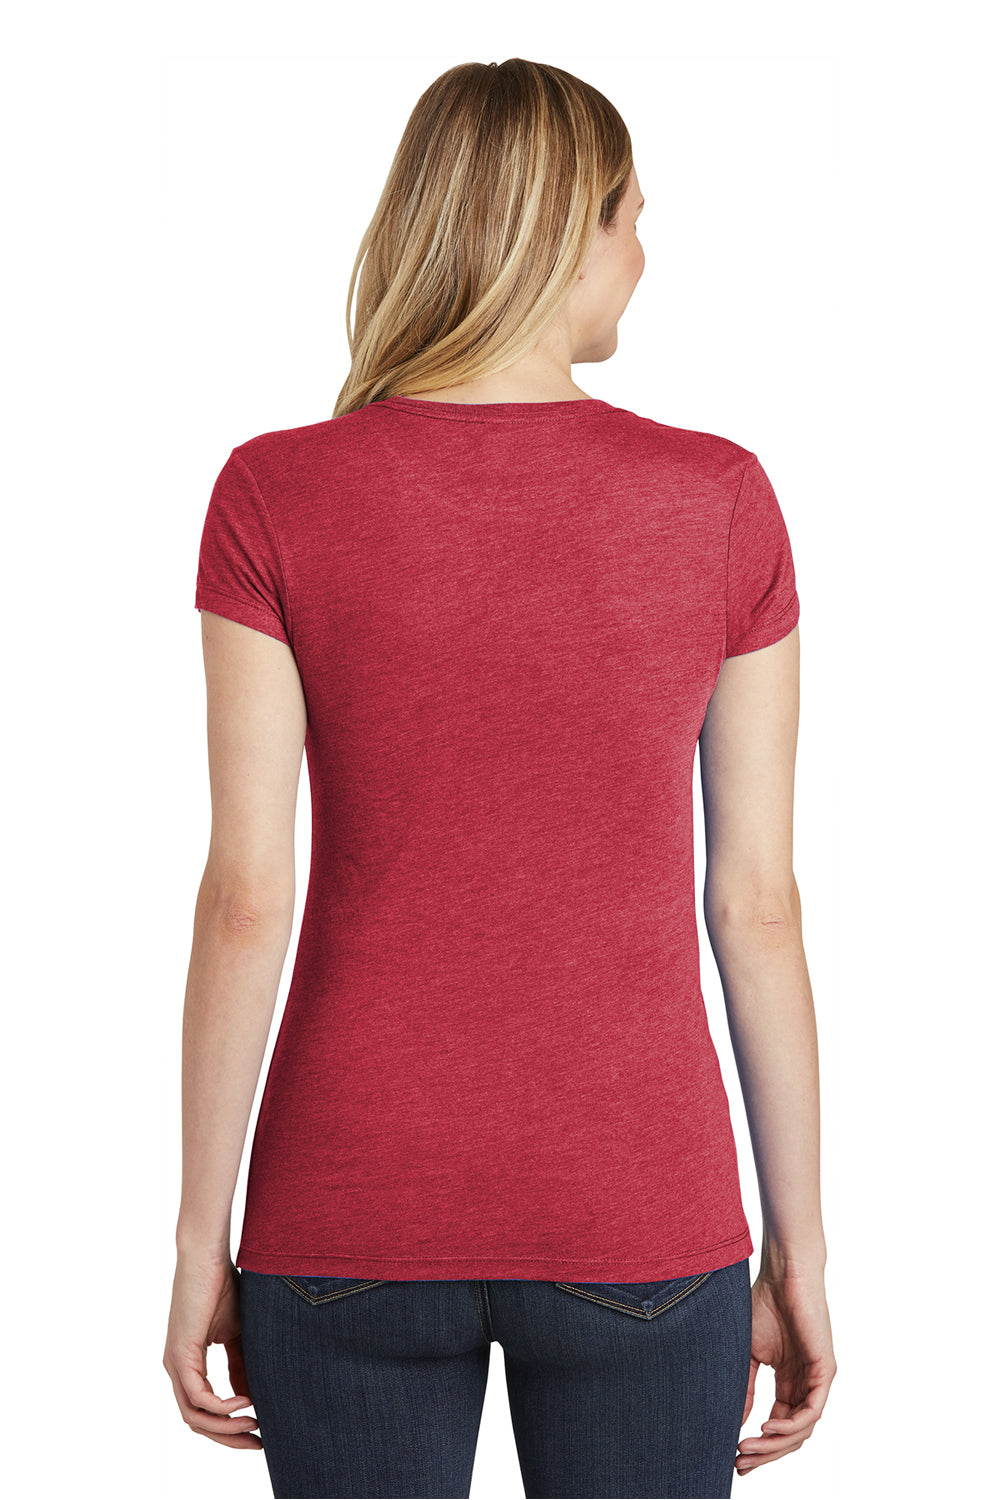 District DT155 Womens Fitted Perfect Tri Short Sleeve Crewneck T-Shirt Red Back